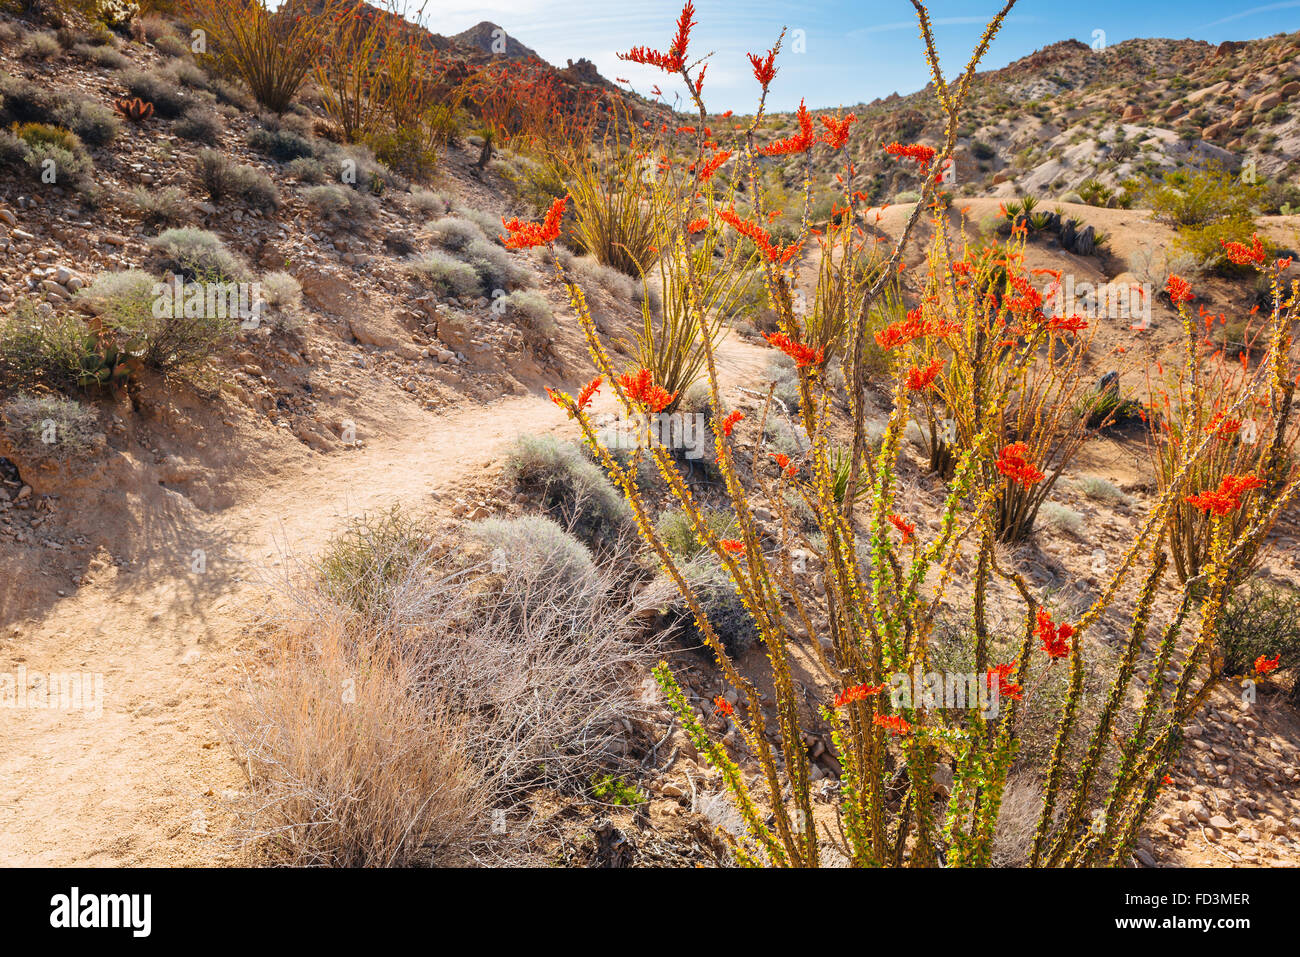 Hiking the Lost Palms Canyon Trail in Joshua Tree National Park, California Stock Photo